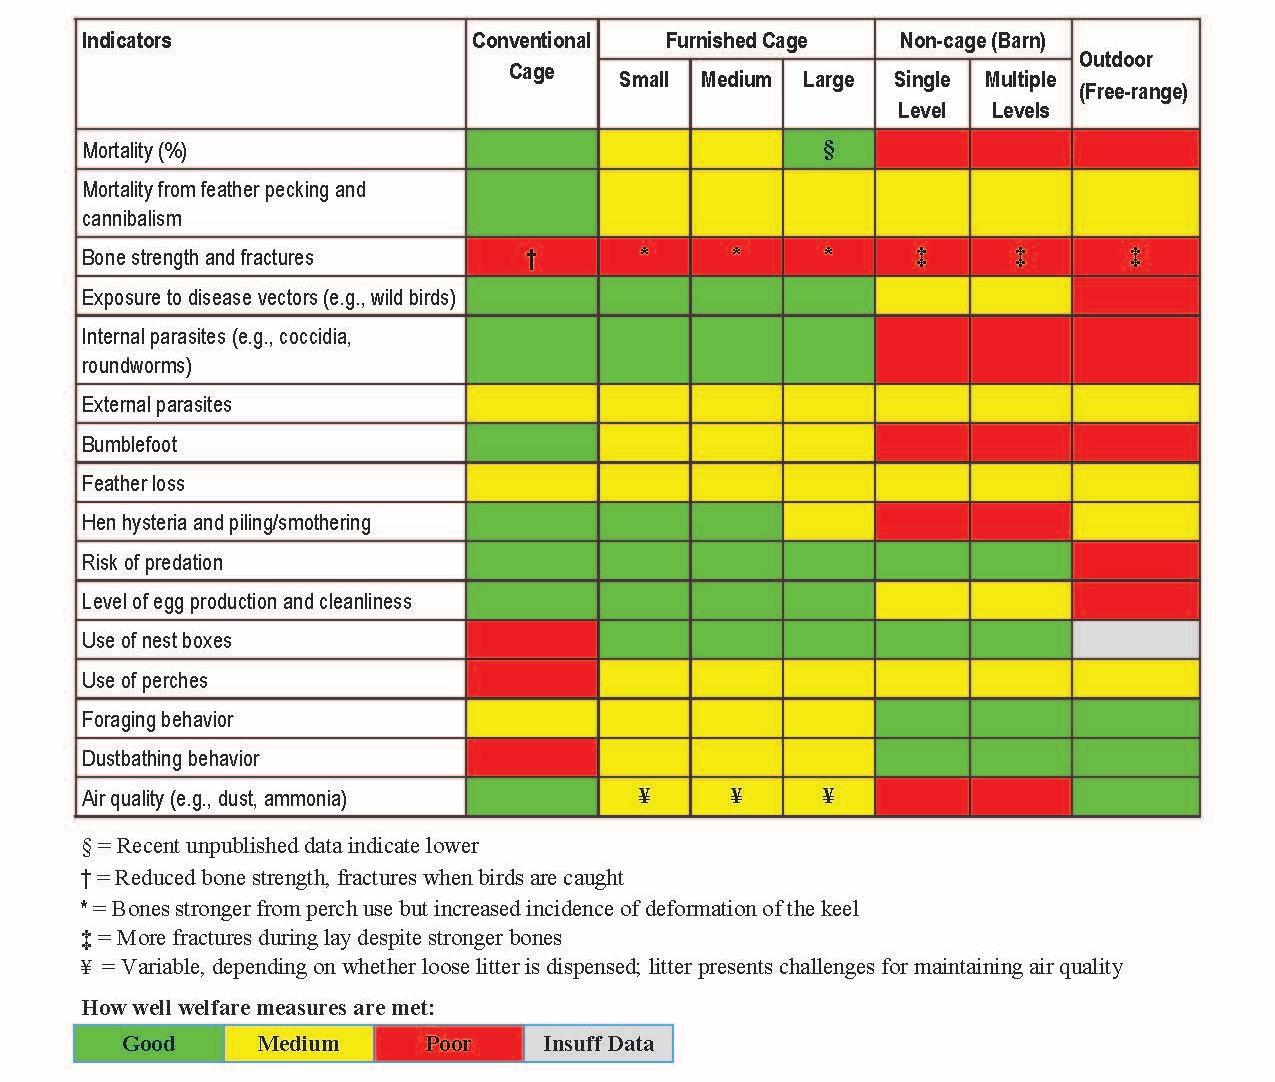 A table showing the advantages and disadvantages of conventional cage, furnished cage, non-cage, and outdoor systems on key laying hen welfare indicators.